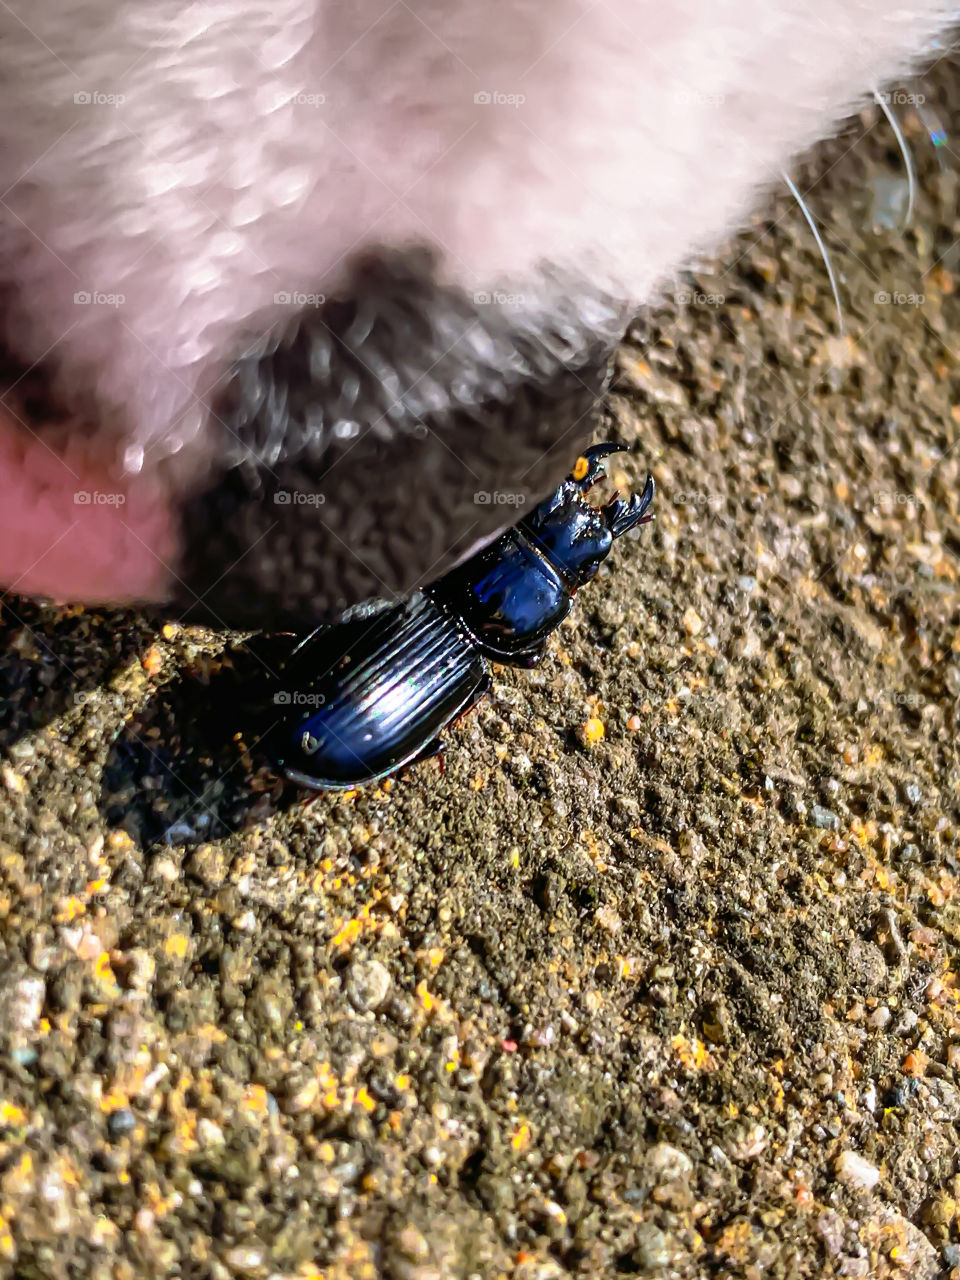 Corgi dog speckle spotted nose sniffing stag beetle cement concrete stone close up micro insect pinchers zoomed in pup puppy curious exploring smelling cute funny Amature phone photography animal pet bug creepy crawly Country inspecting nosy sniff